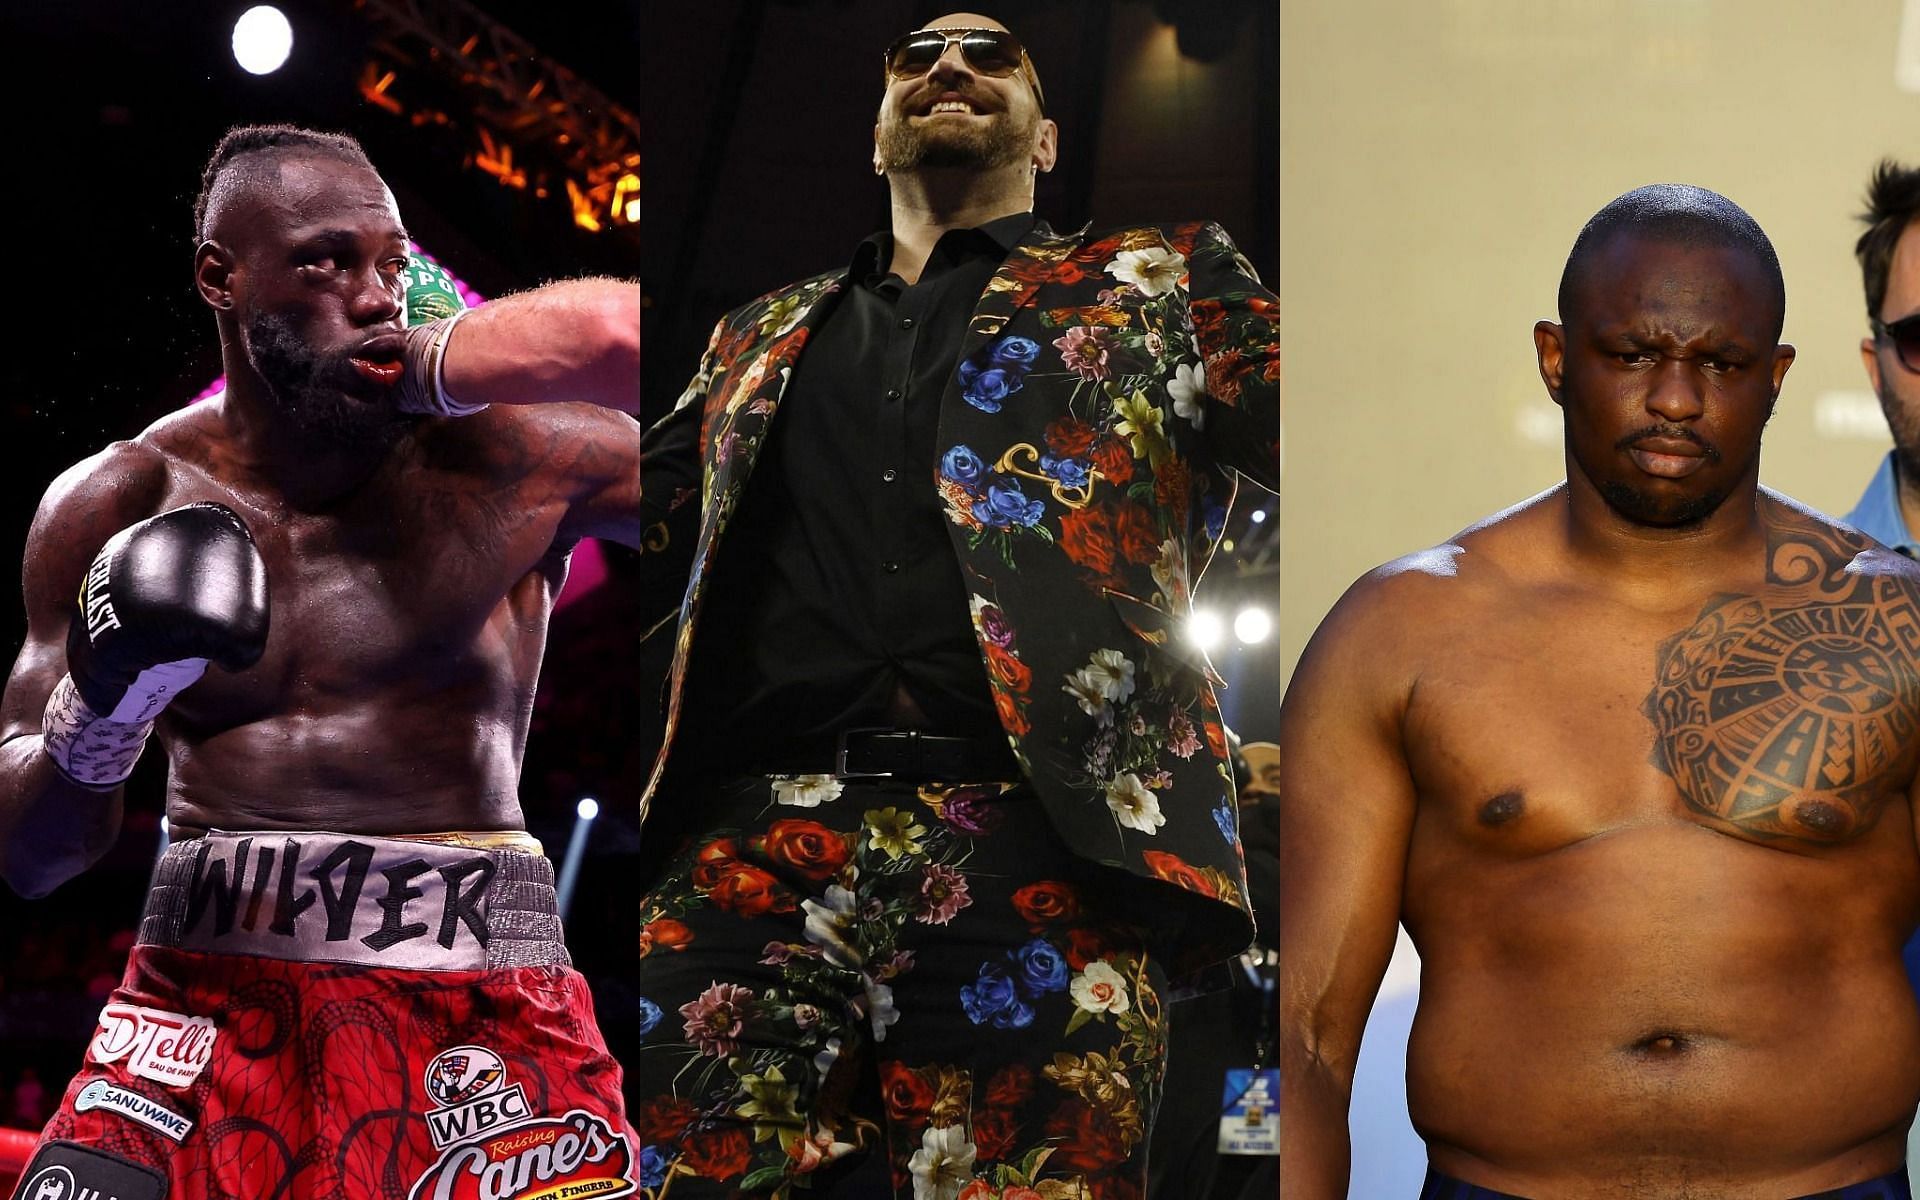 Deontay Wilder (L) would KO Dillian Whyte (R) according to Tyson Fury (center)